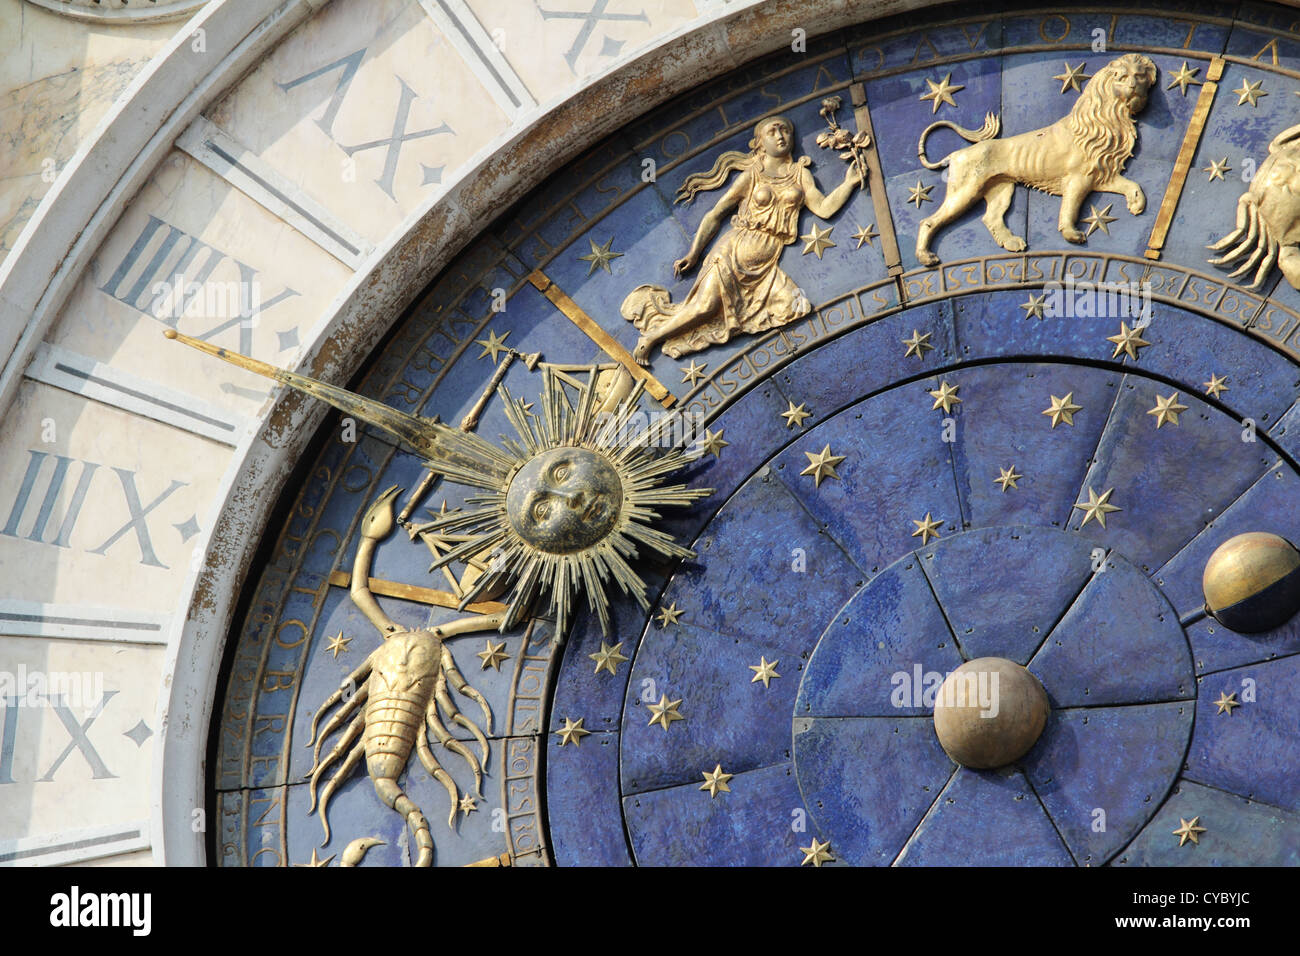 Astronomical Clock Tower (Torre dell'Orologio) Details. St. Mark's Square (Piazza San Marko), Venice, Italy. Stock Photo